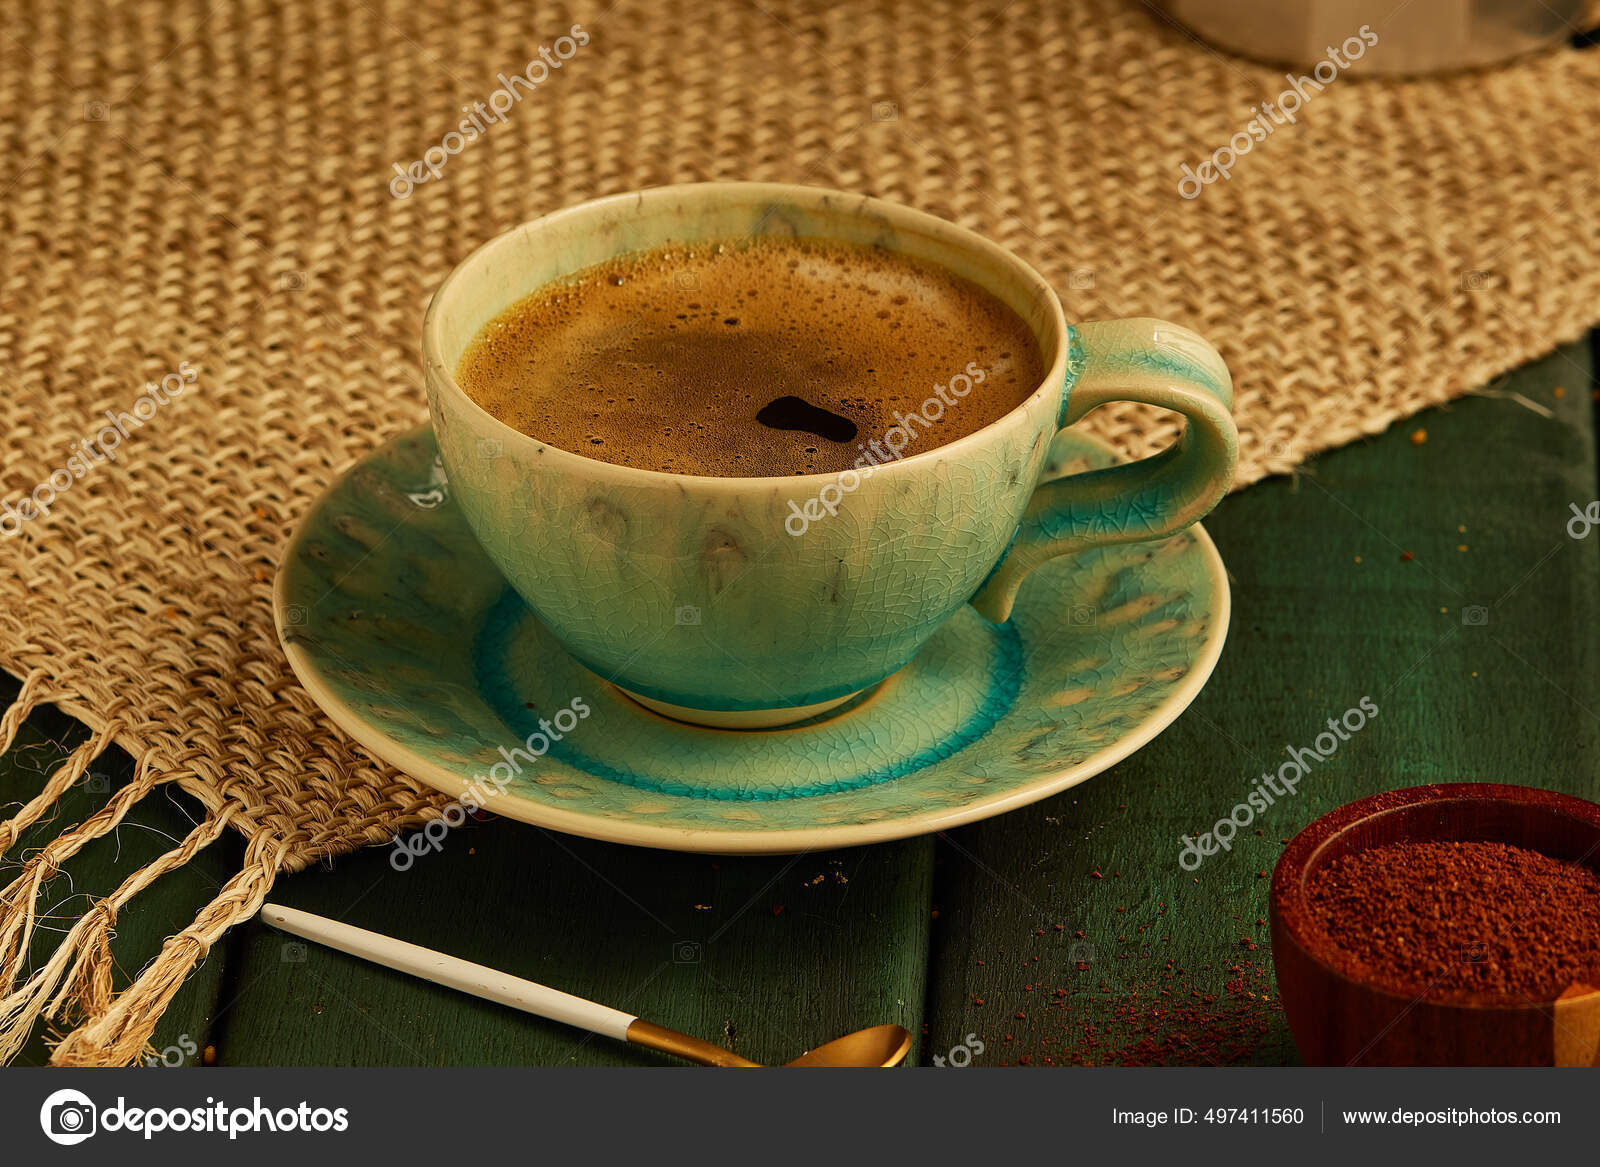 Close-up of espresso coffee in a single shot glass cup with saucer on the  wooden table. Stock Photo